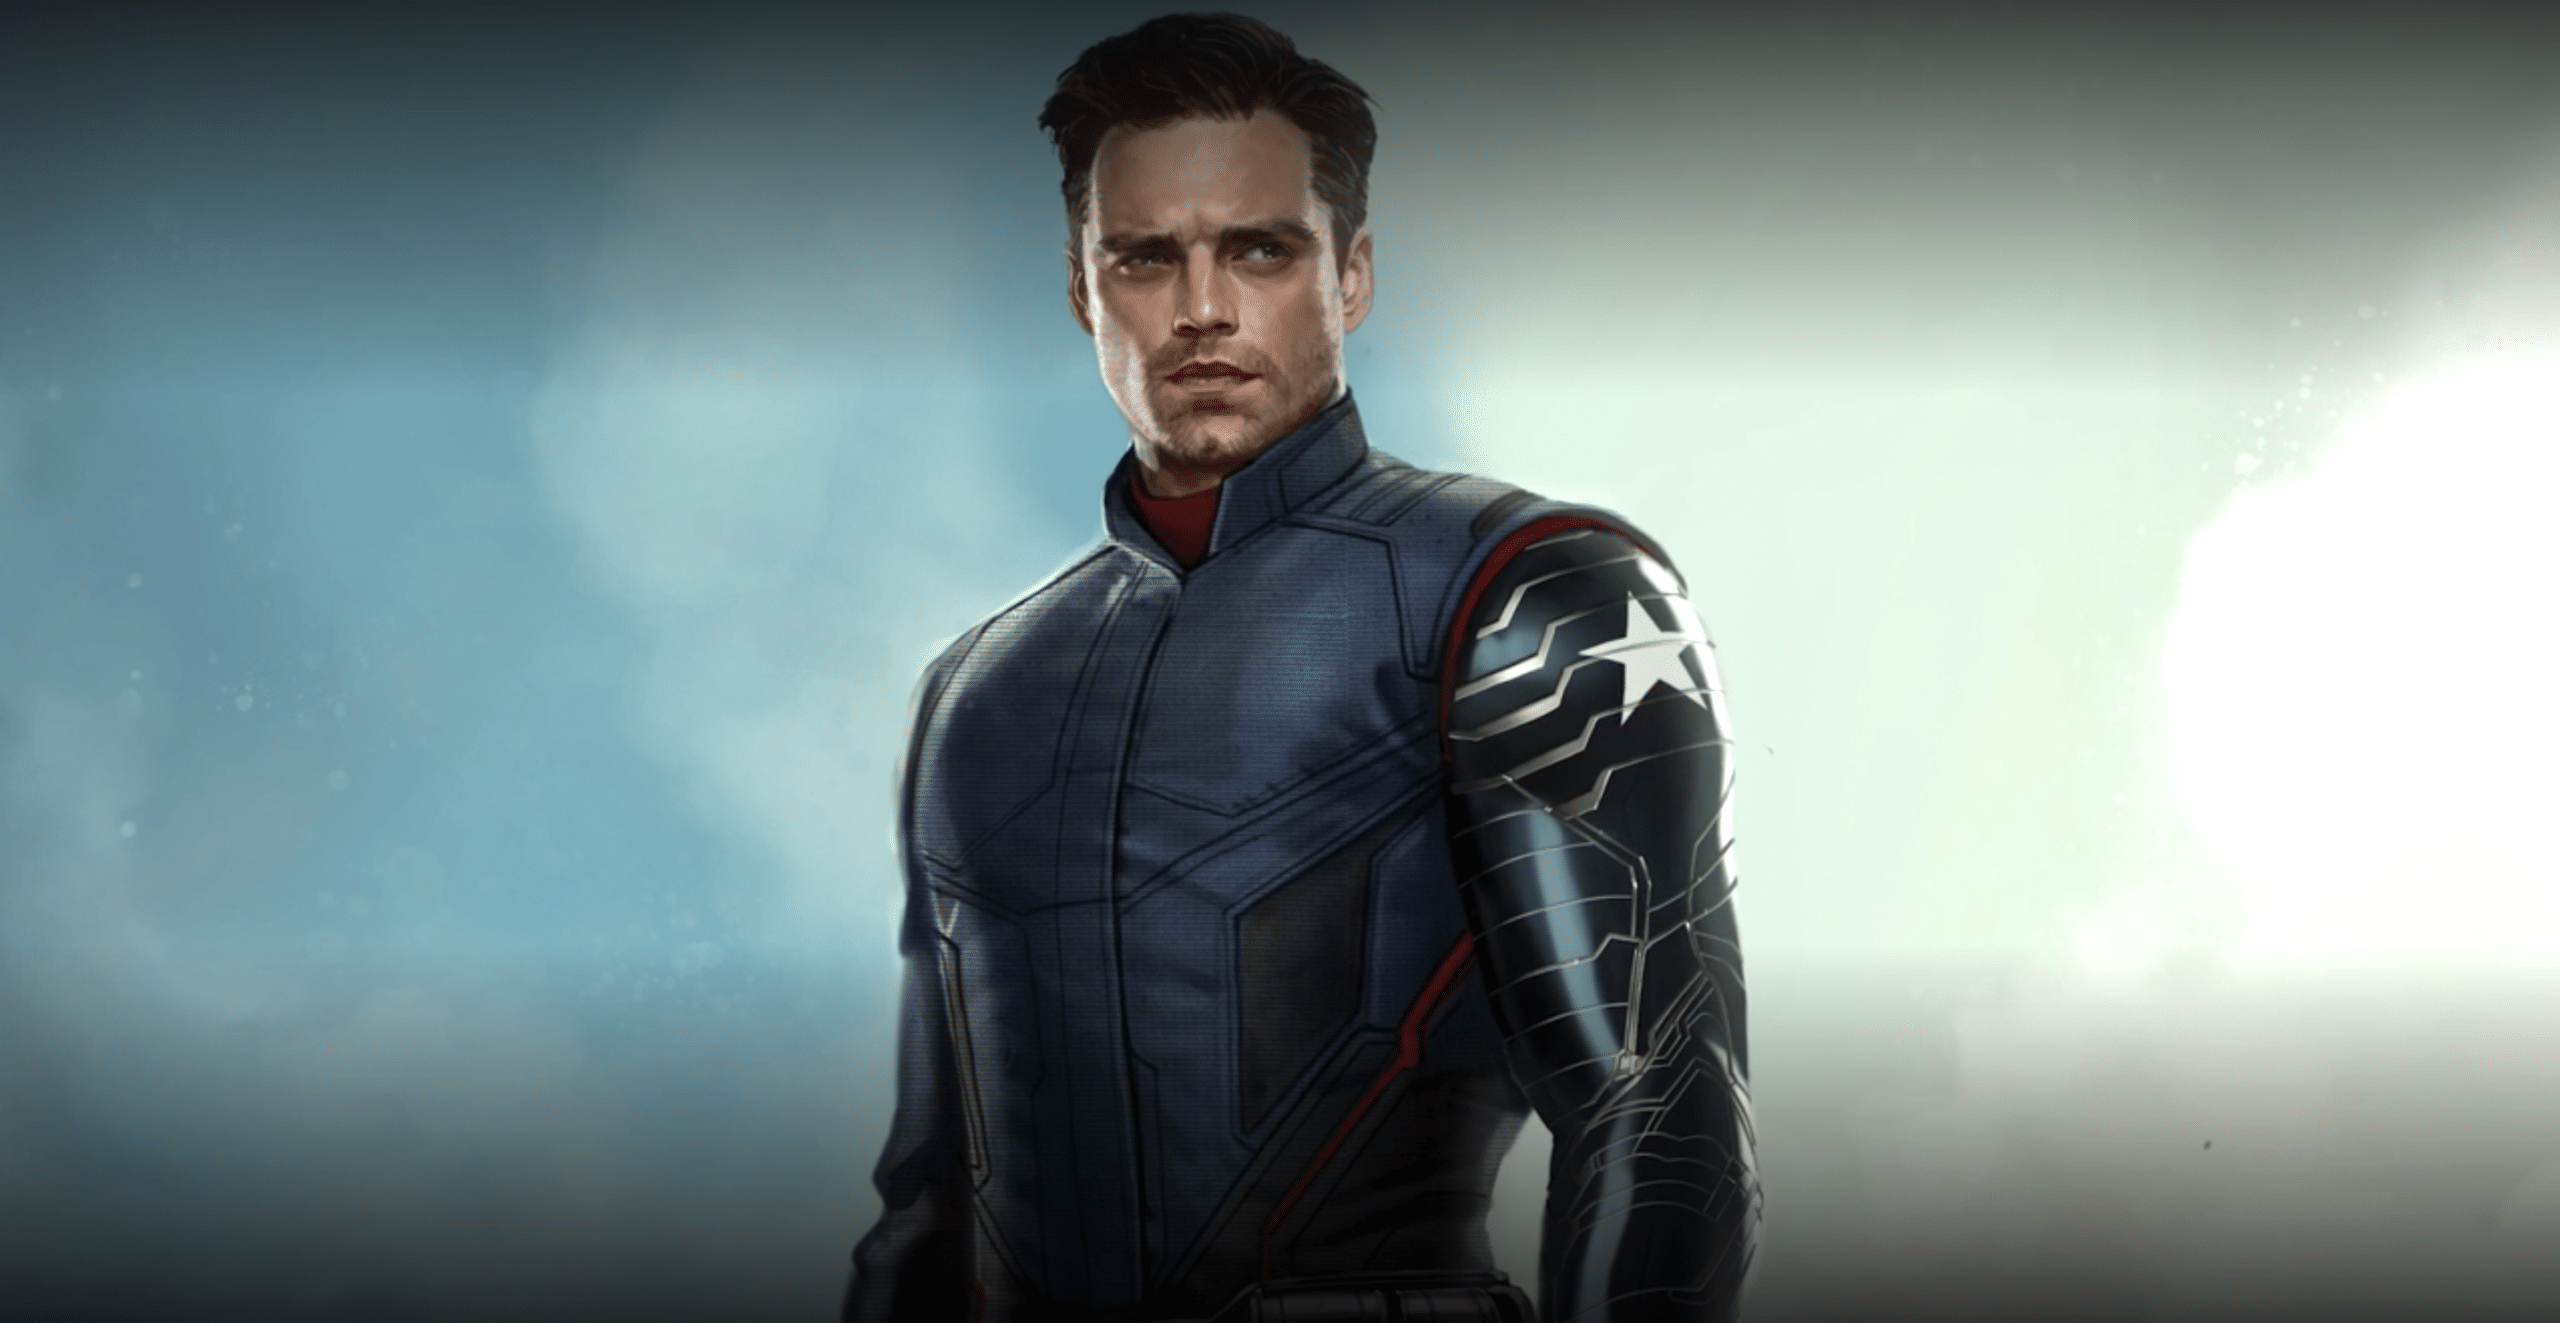 Sebastian Stan Shares Costume Test Photo With New Design Of The Winter Soldier